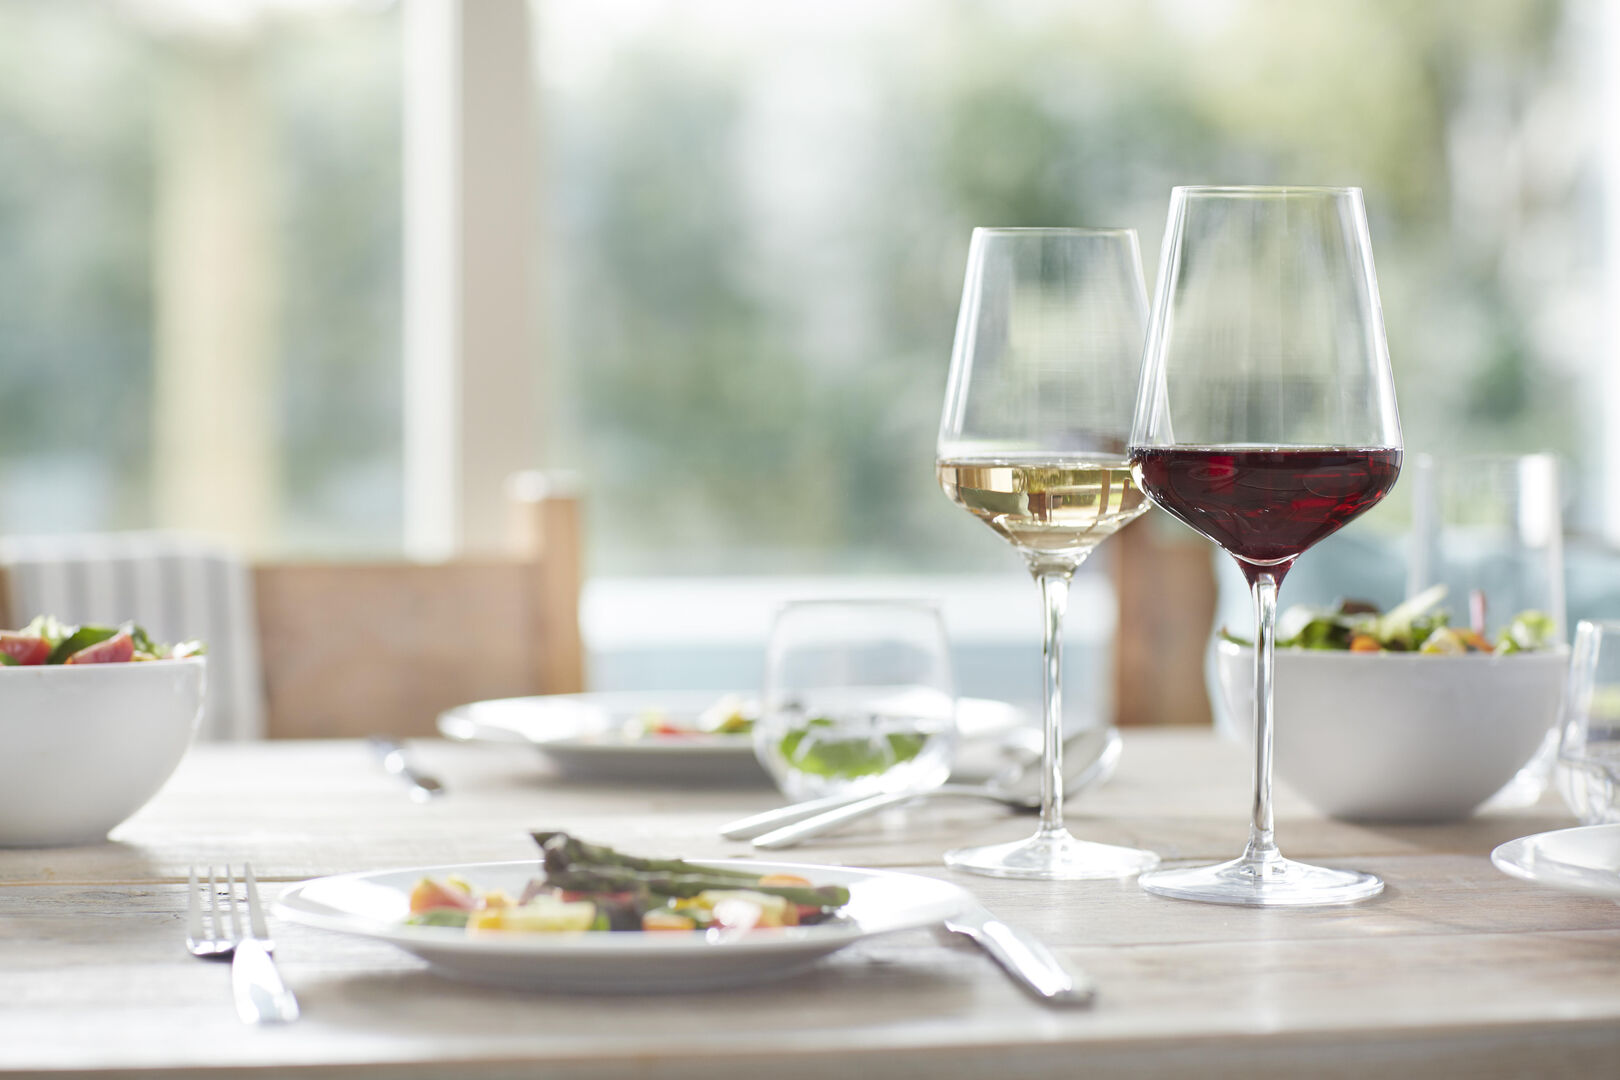 Raise a glass with vivo | Villeroy & Boch Group at Thrifty Foods!